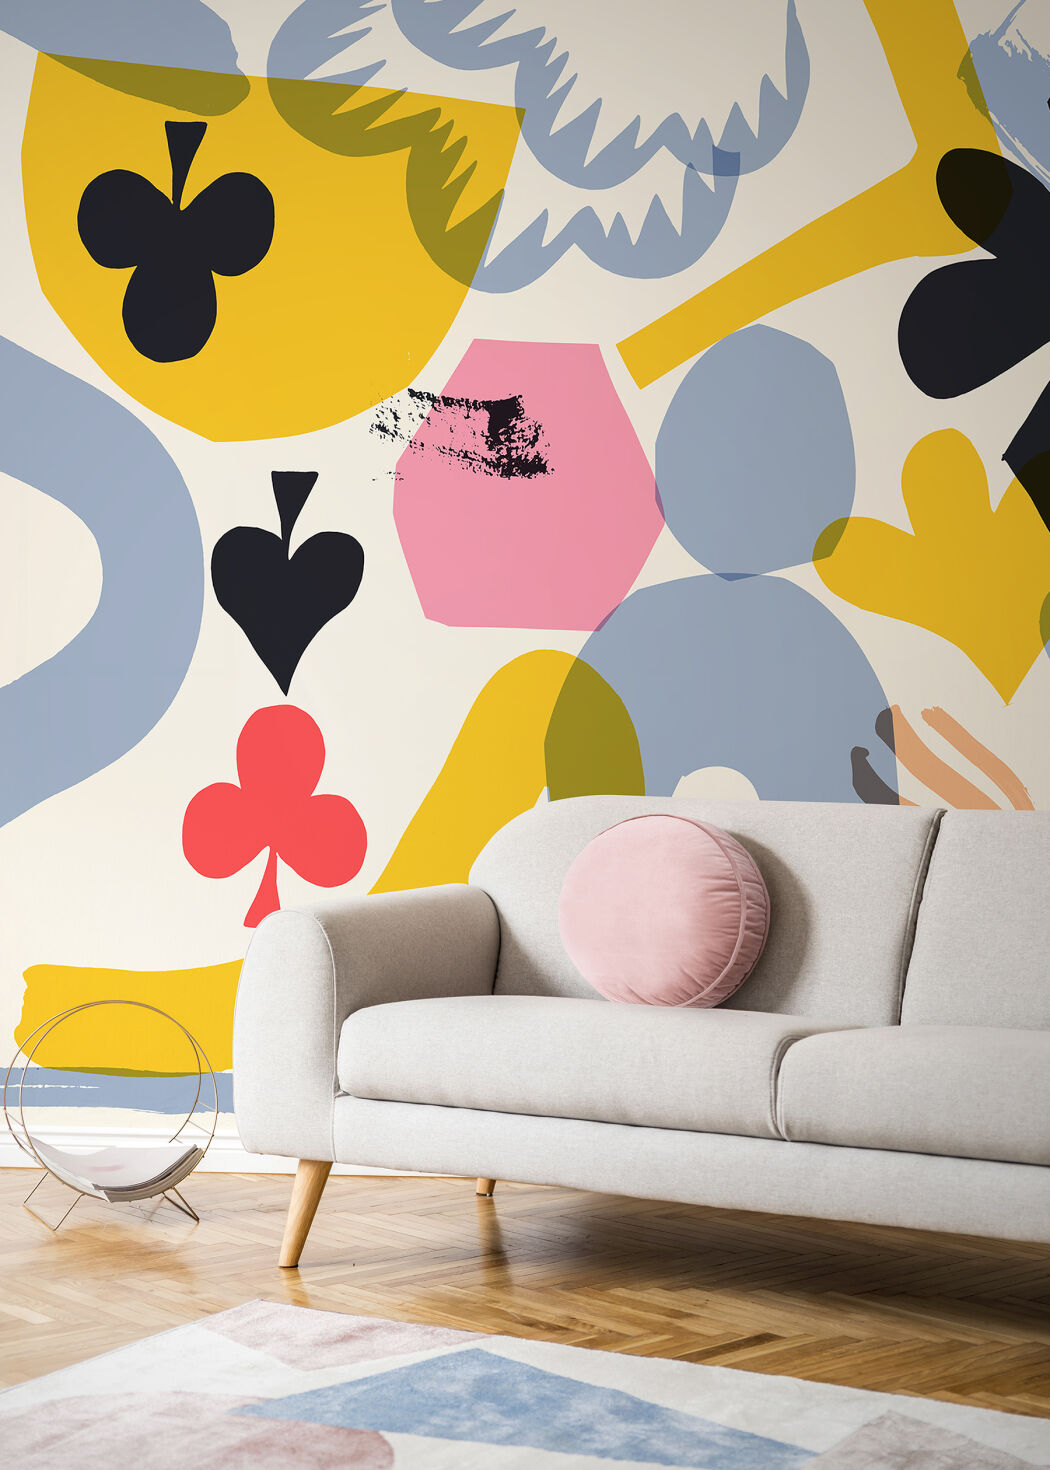 Illustrated graphic wall paper by Erica Jacobson